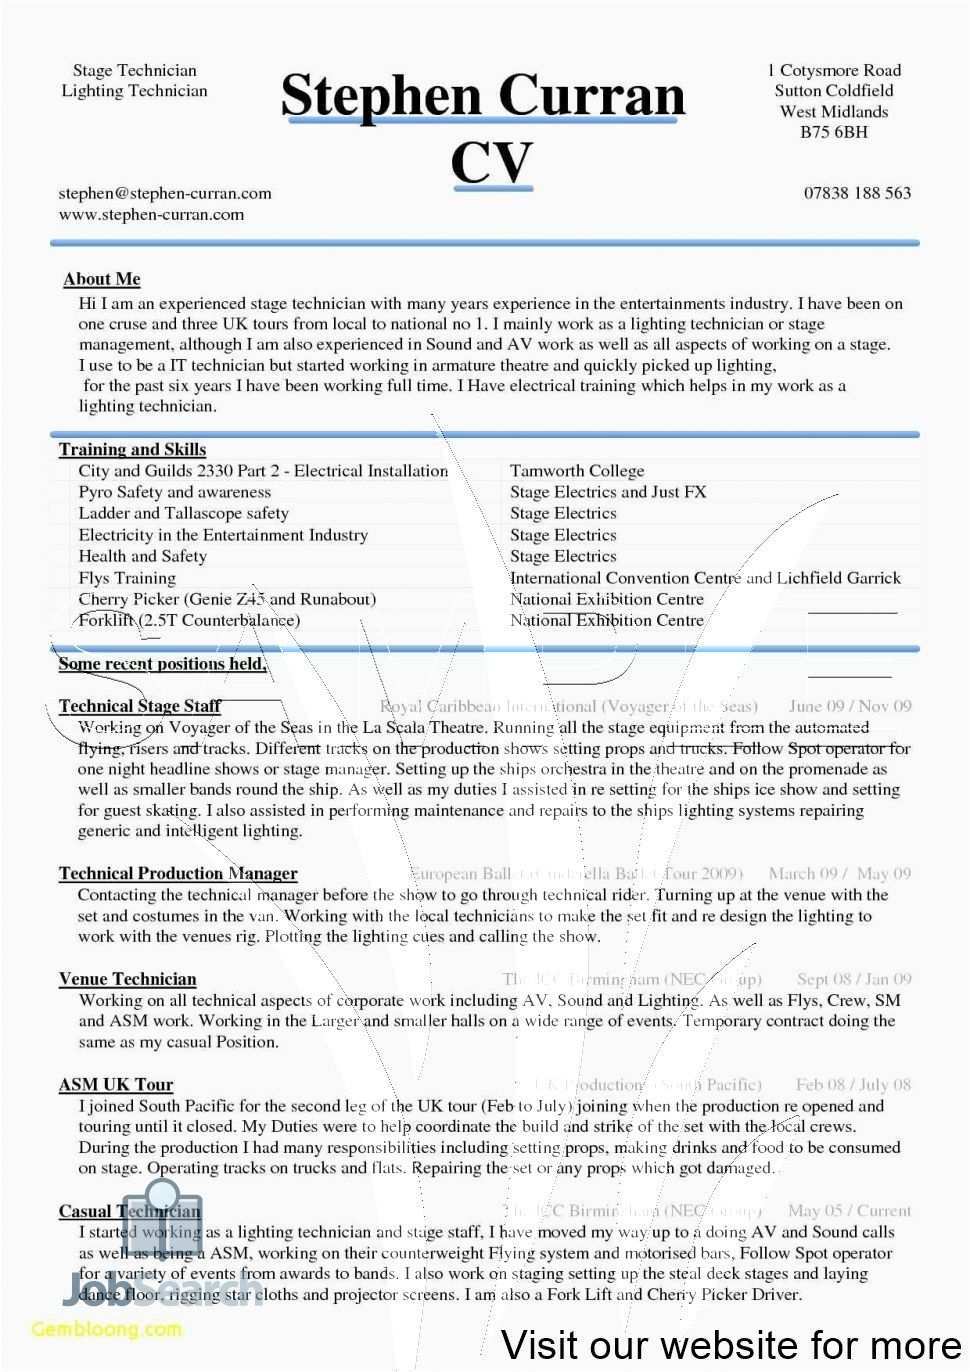 Resume Template Professional Free Layout In 2020 Resume Template Professional Resume Template Word Resume Template Free